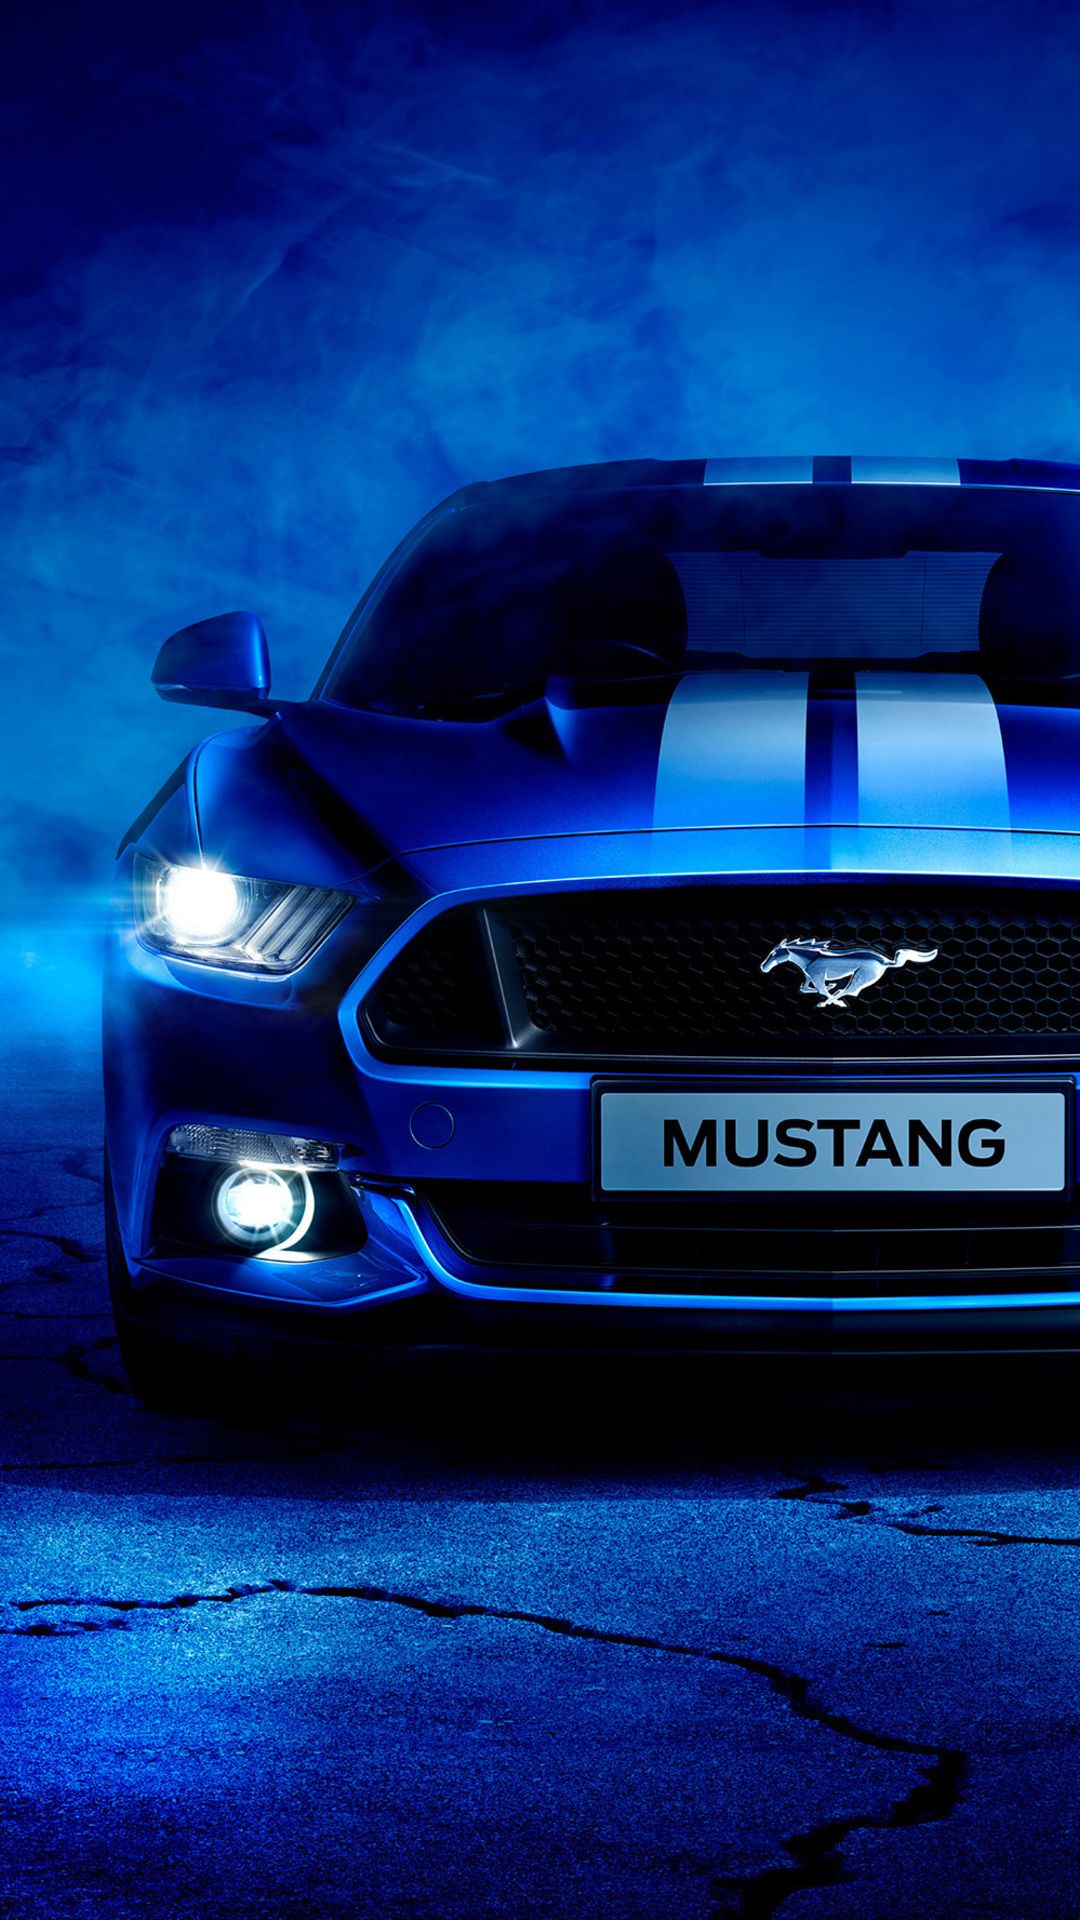 1080x1920 ford mustang, ford, mustang, hd, 2018 cars, behance for iPhone 8 wallpaper